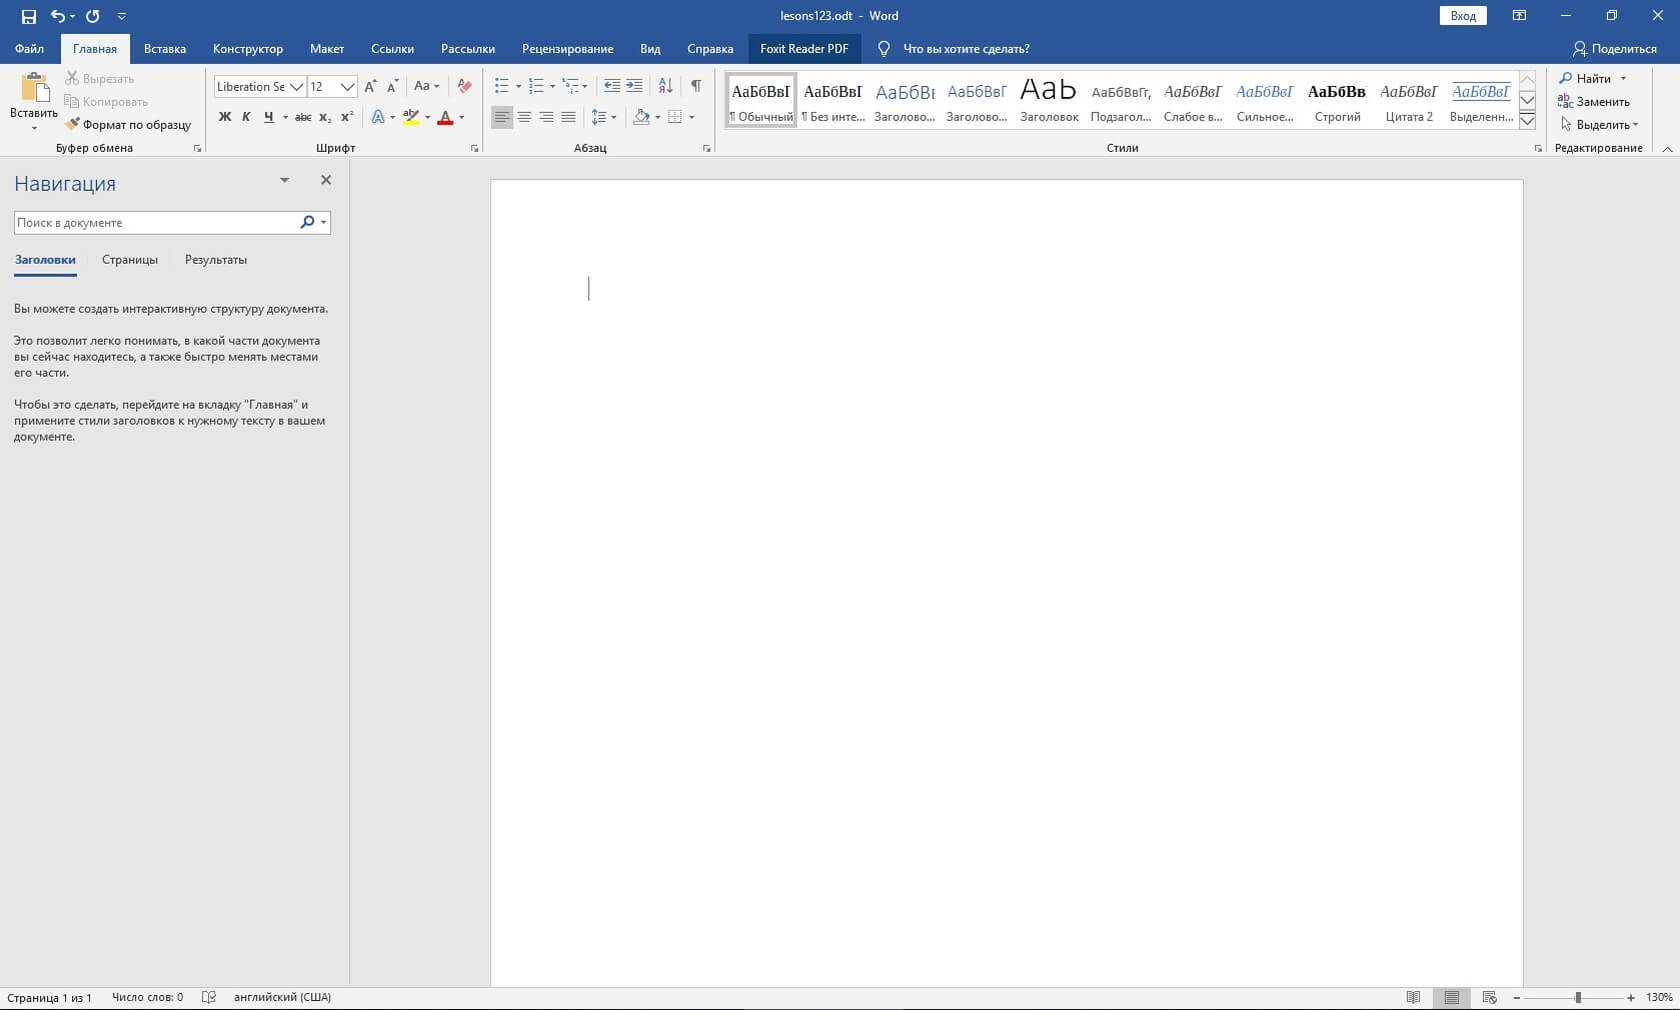 microsoft word 2019 for pc